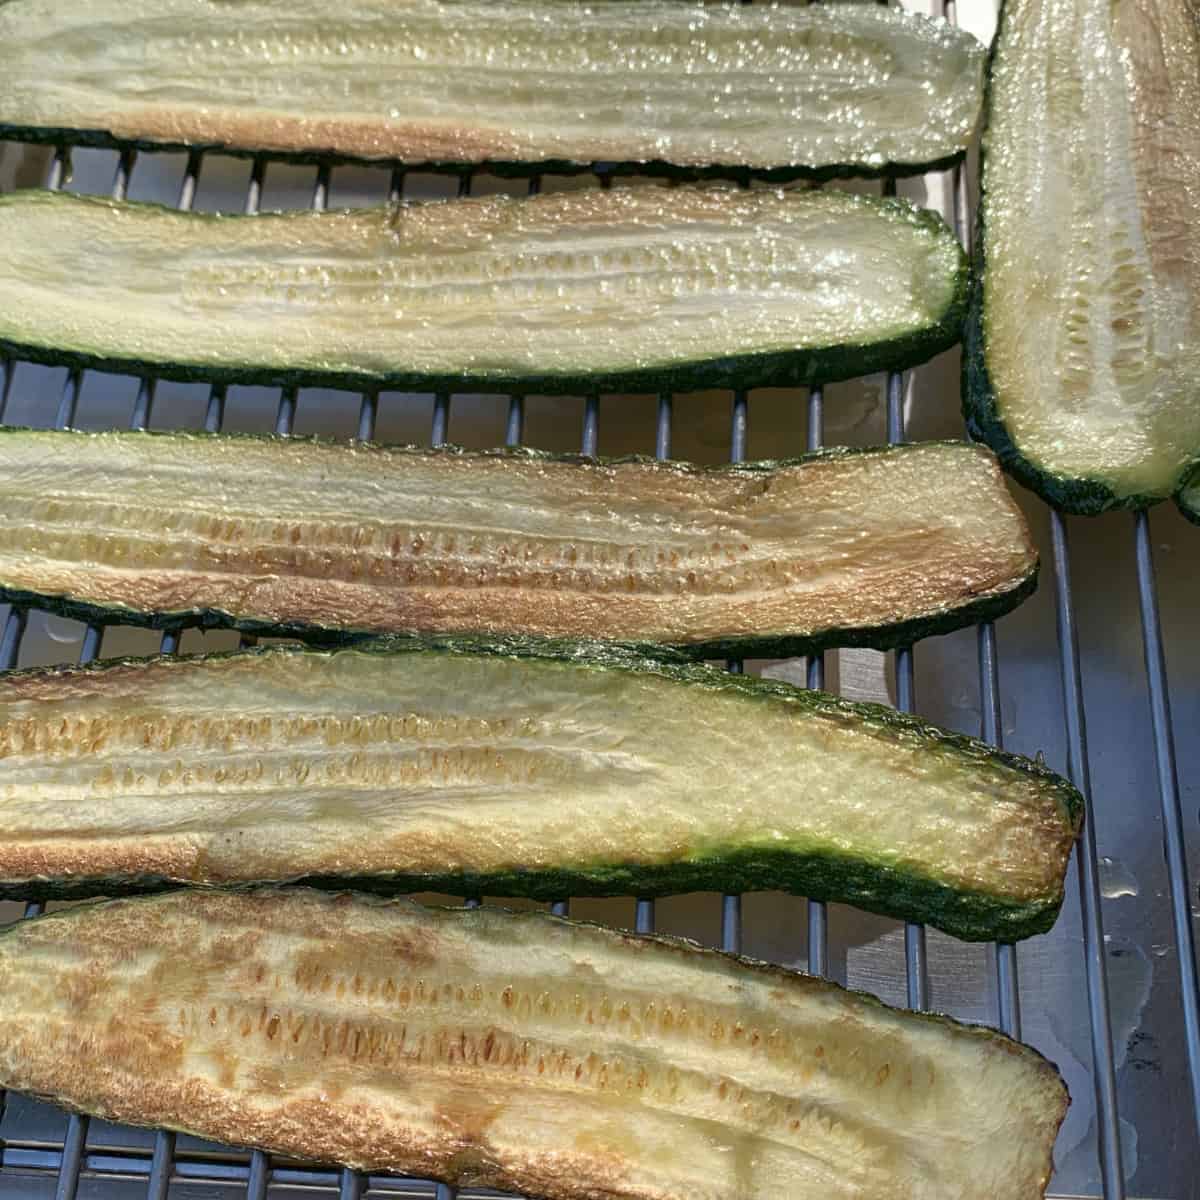 Fried zucchini on a wire rack.